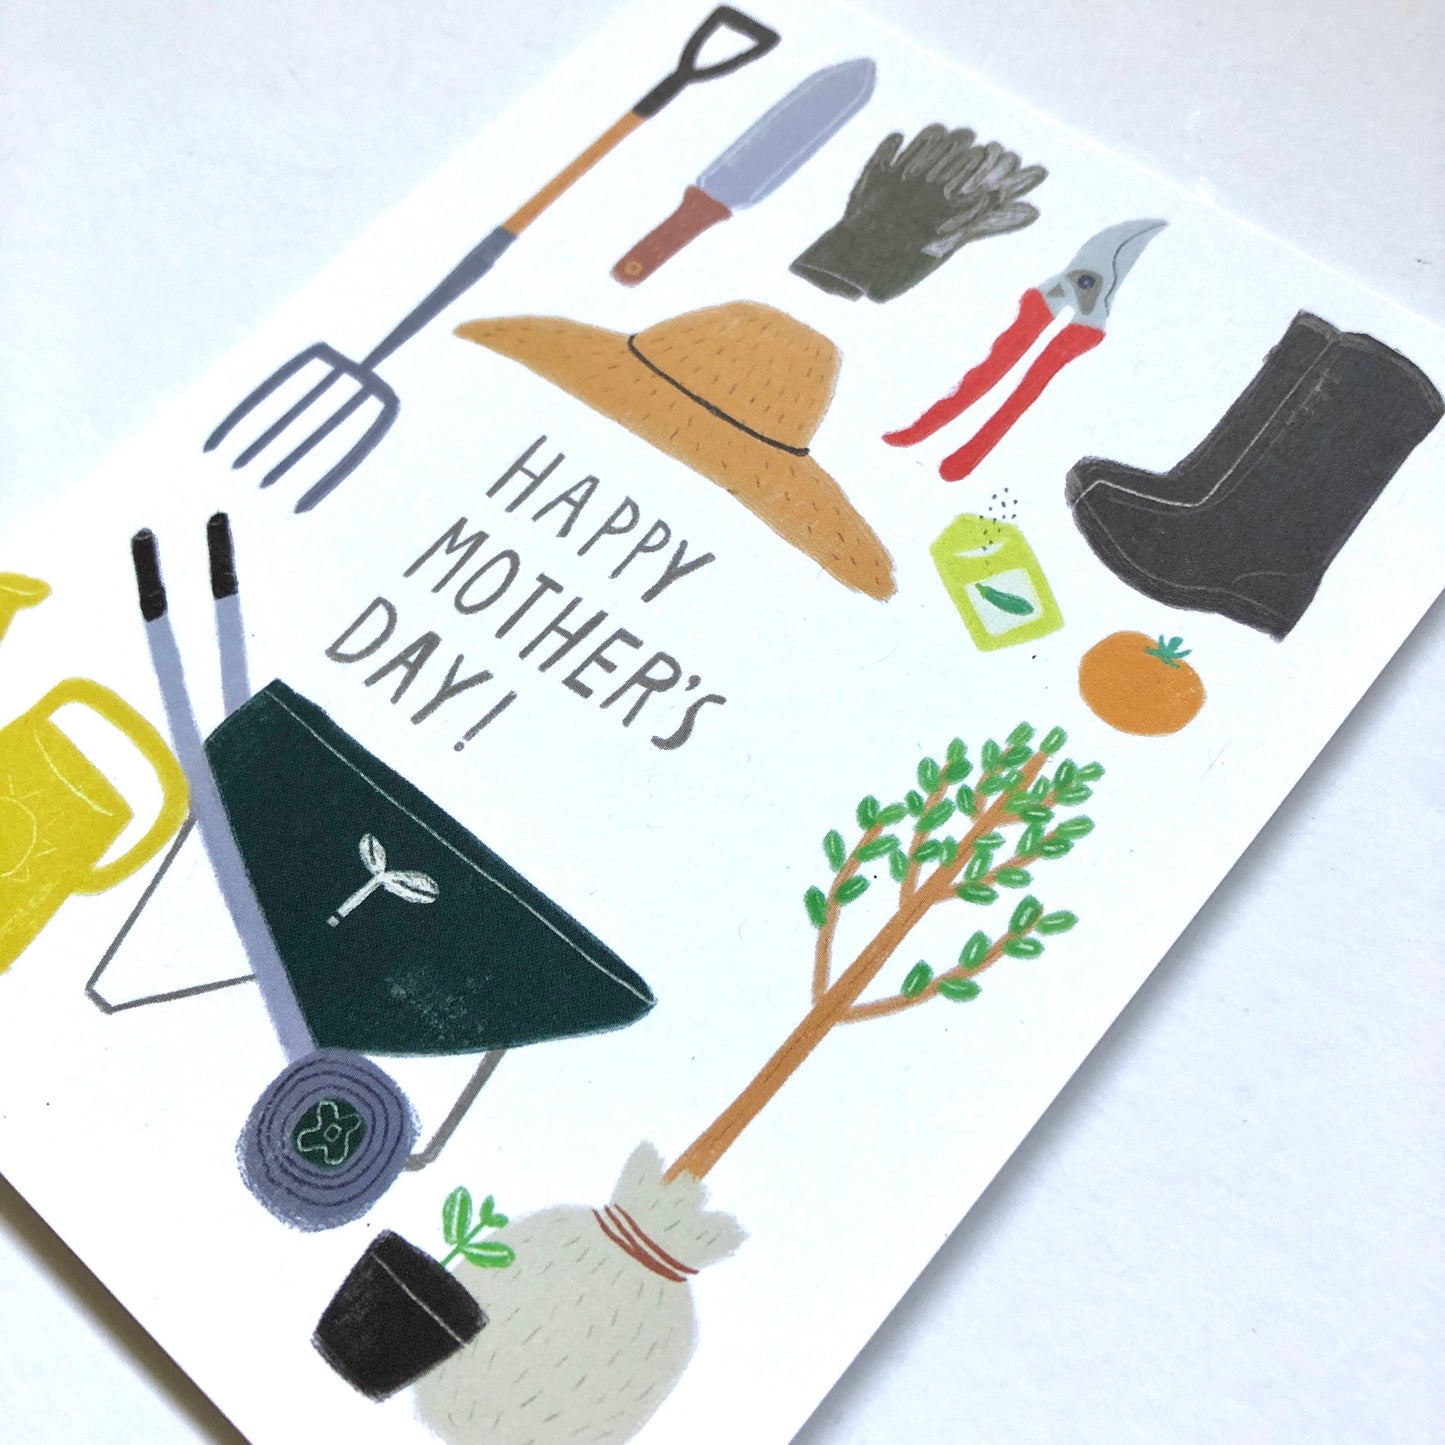 Gardening Mom Mother’s Day Card